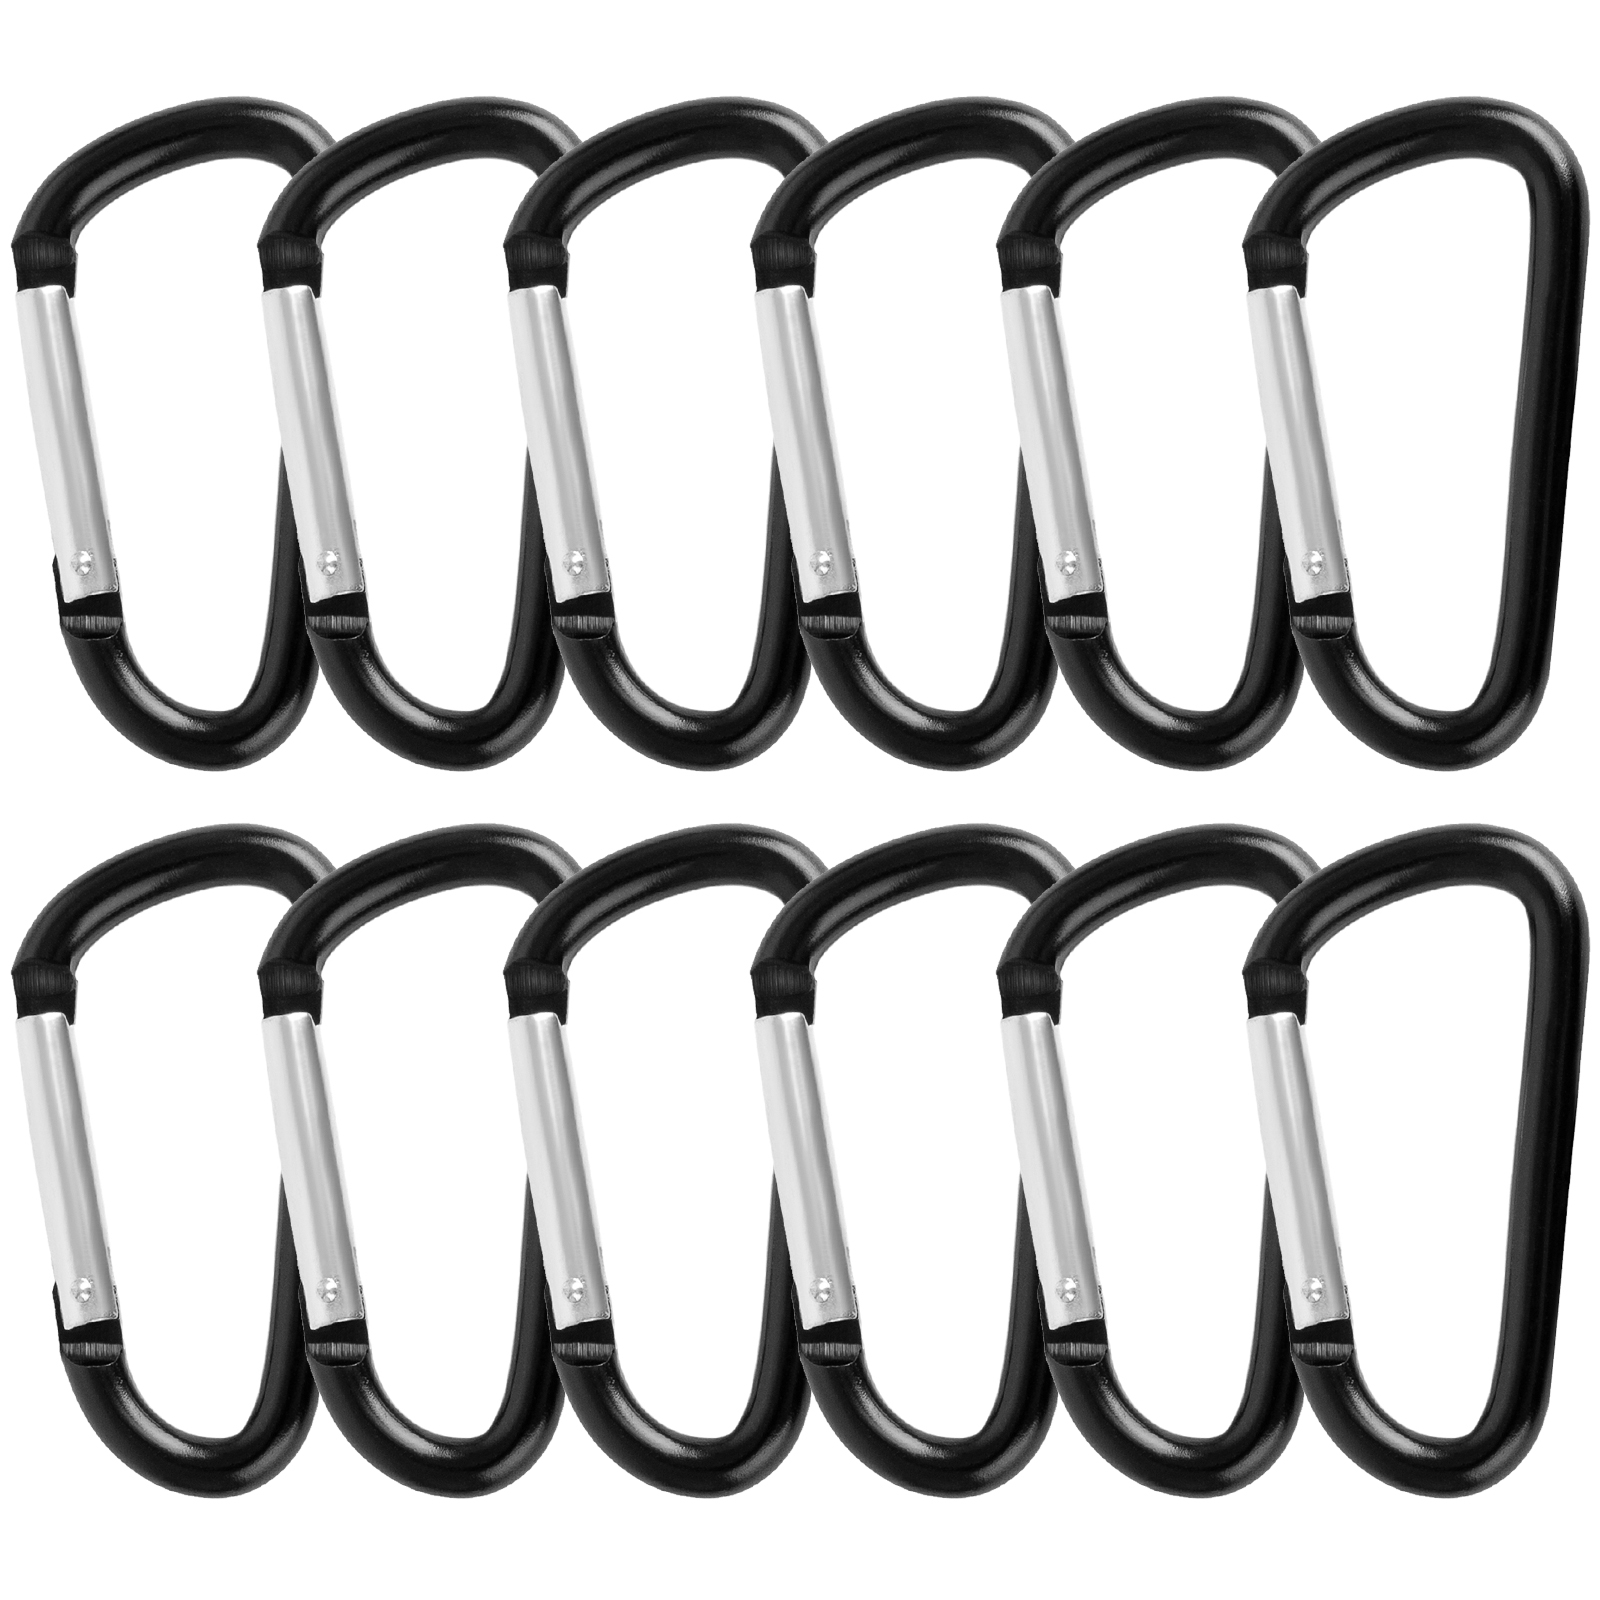 TOPTIE 48PCS Carabiner Keychain, 3 Inch Aluminum D Ring Clips